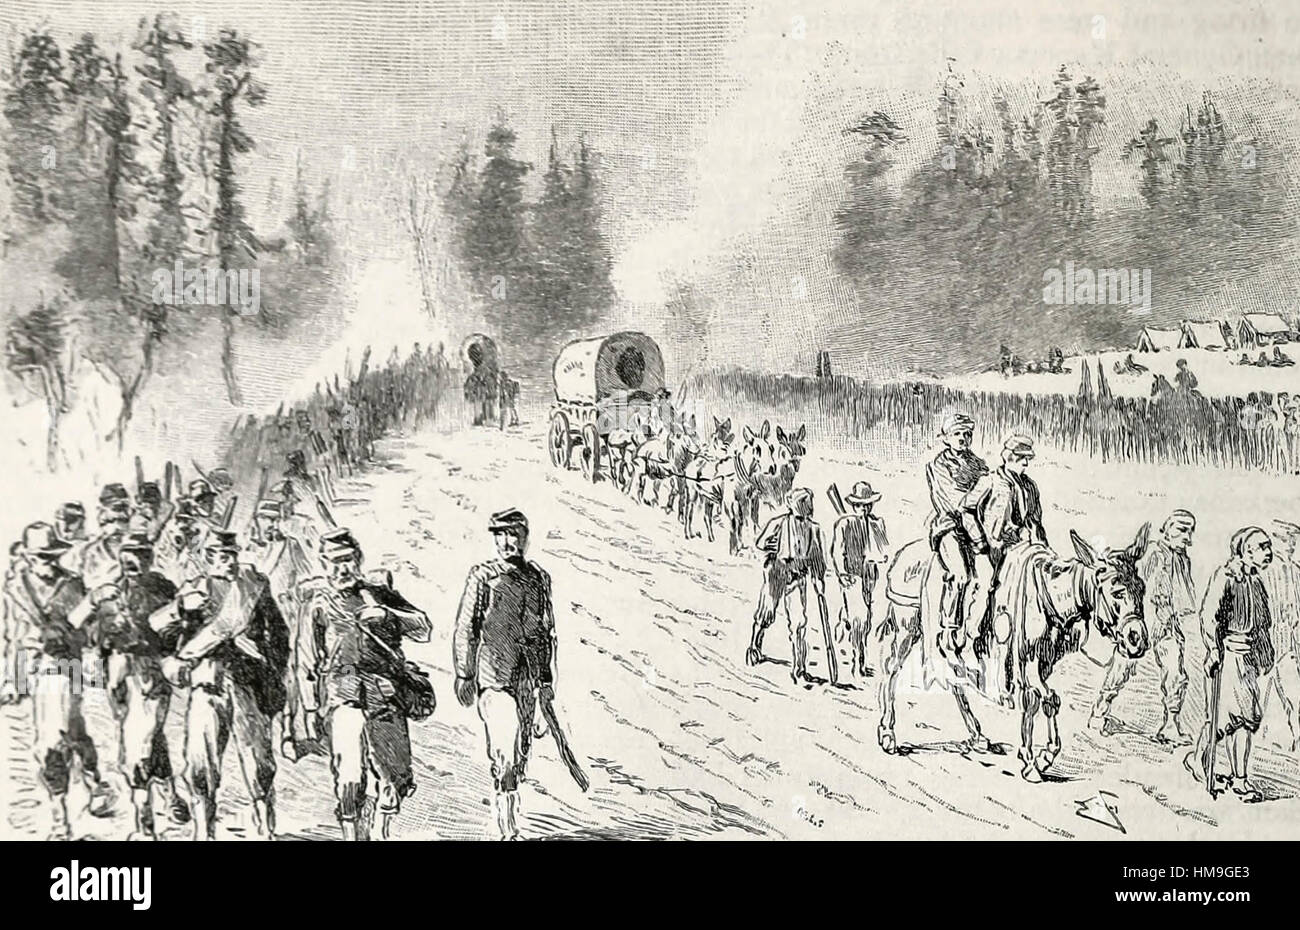 Out of the Wilderness, Sunday morning, May 8, 1864 - The March to Spotsylvania, USA Civil War Stock Photo